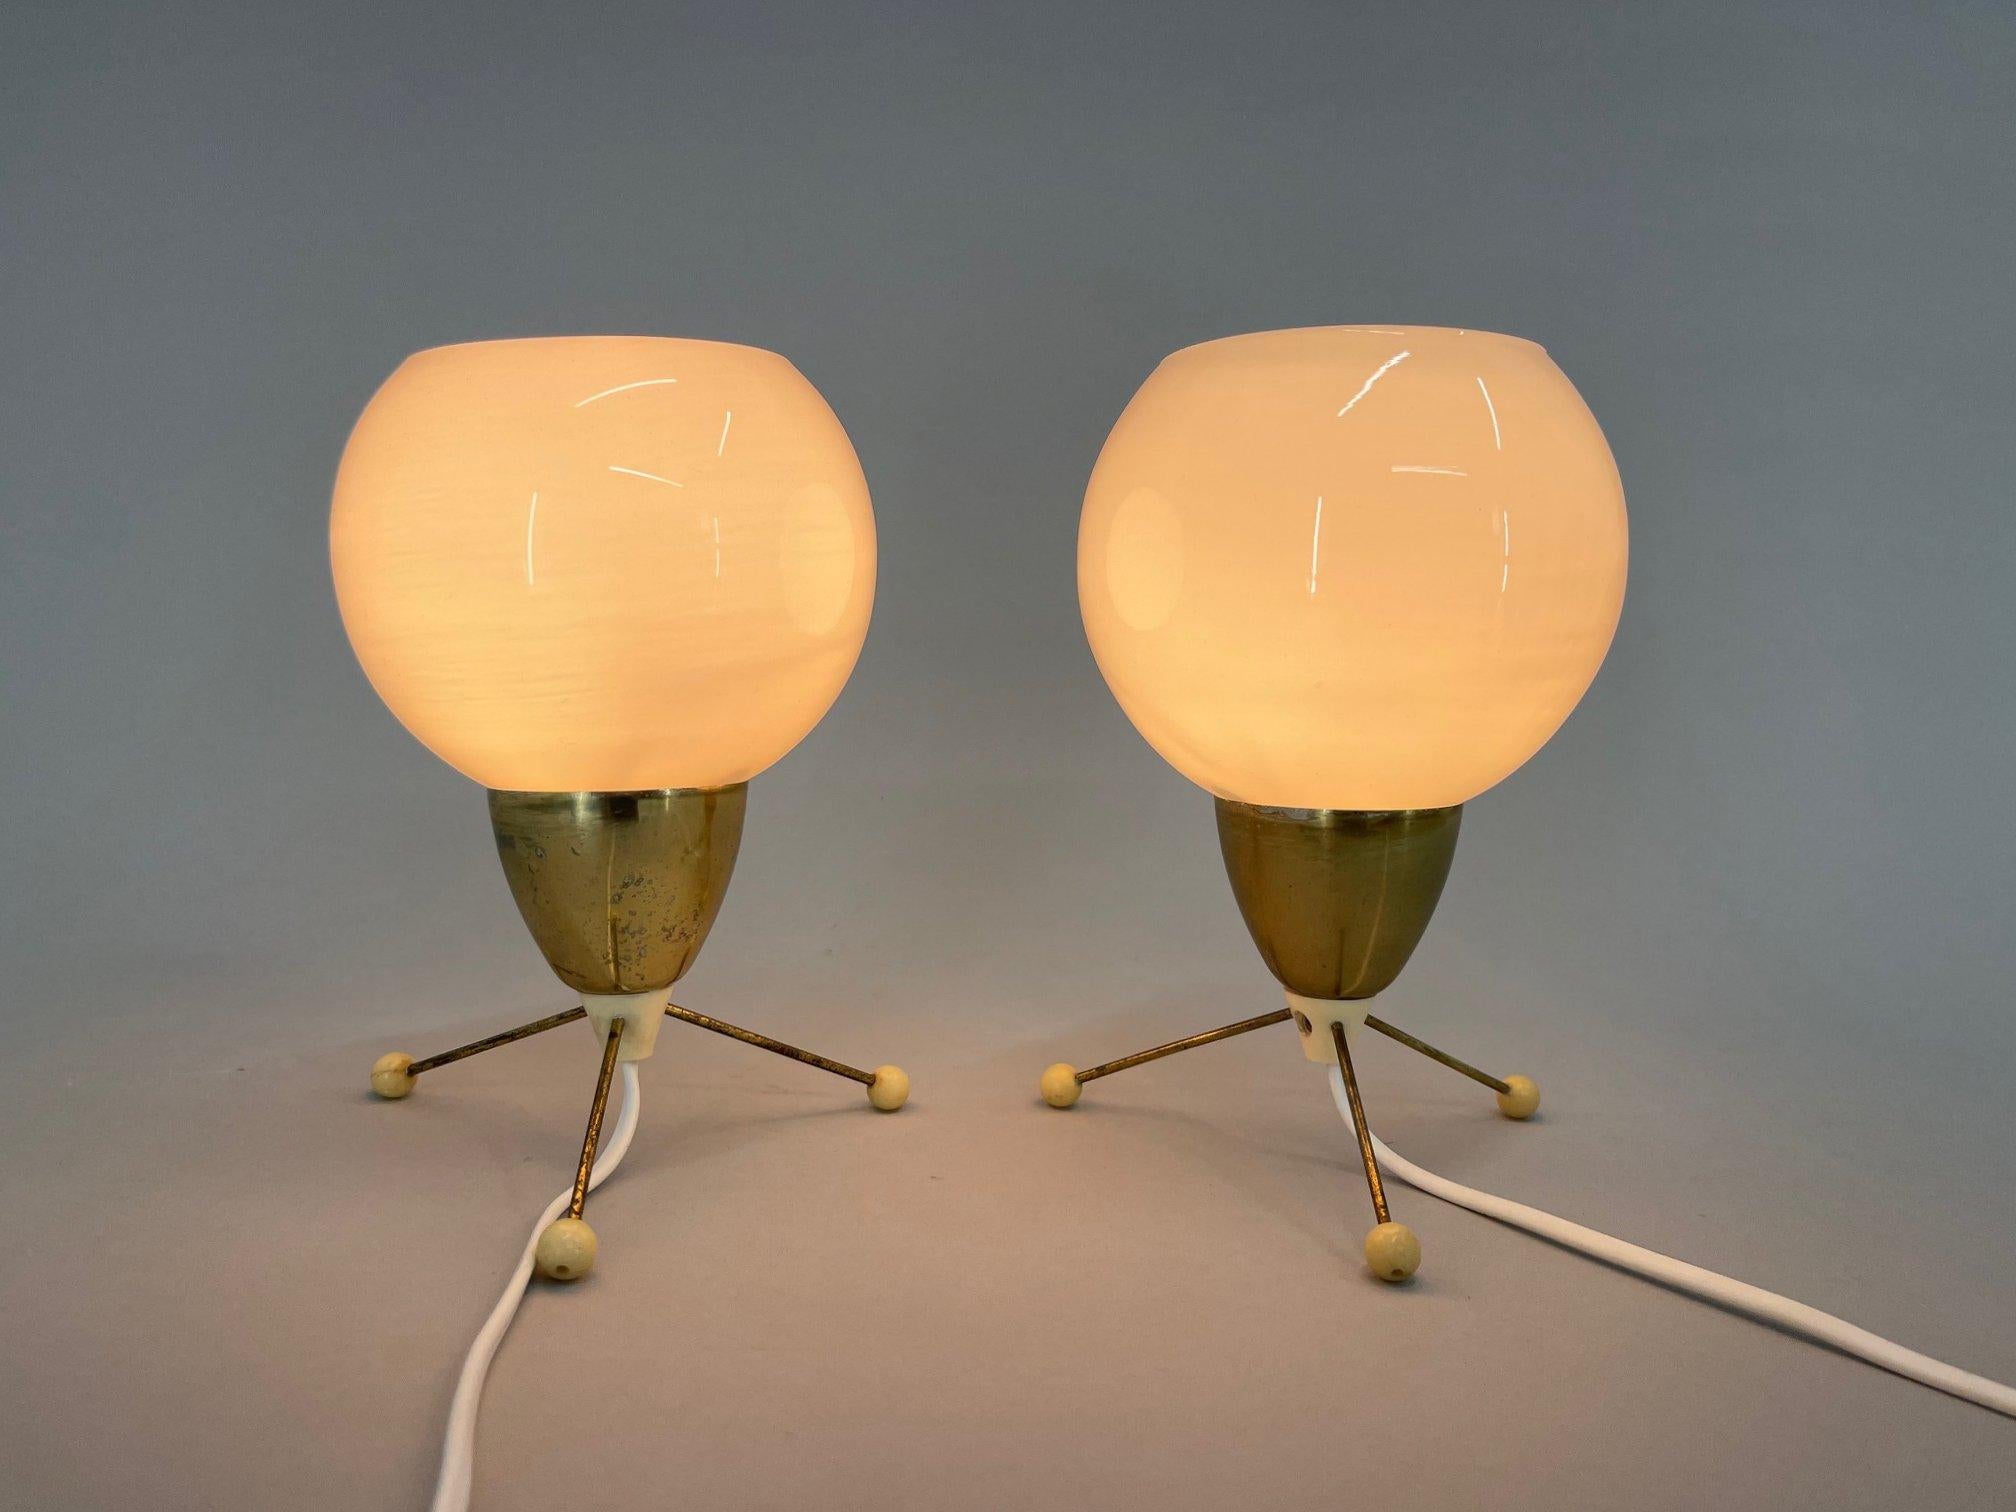 Set of two space age table lamps designed by Stanislav Kucera and produced in Kamenický Šenov in former Czechoslovakia in the 1960's. The bases of the lamps have some signs of use (see photo) and the shades have been replaced.